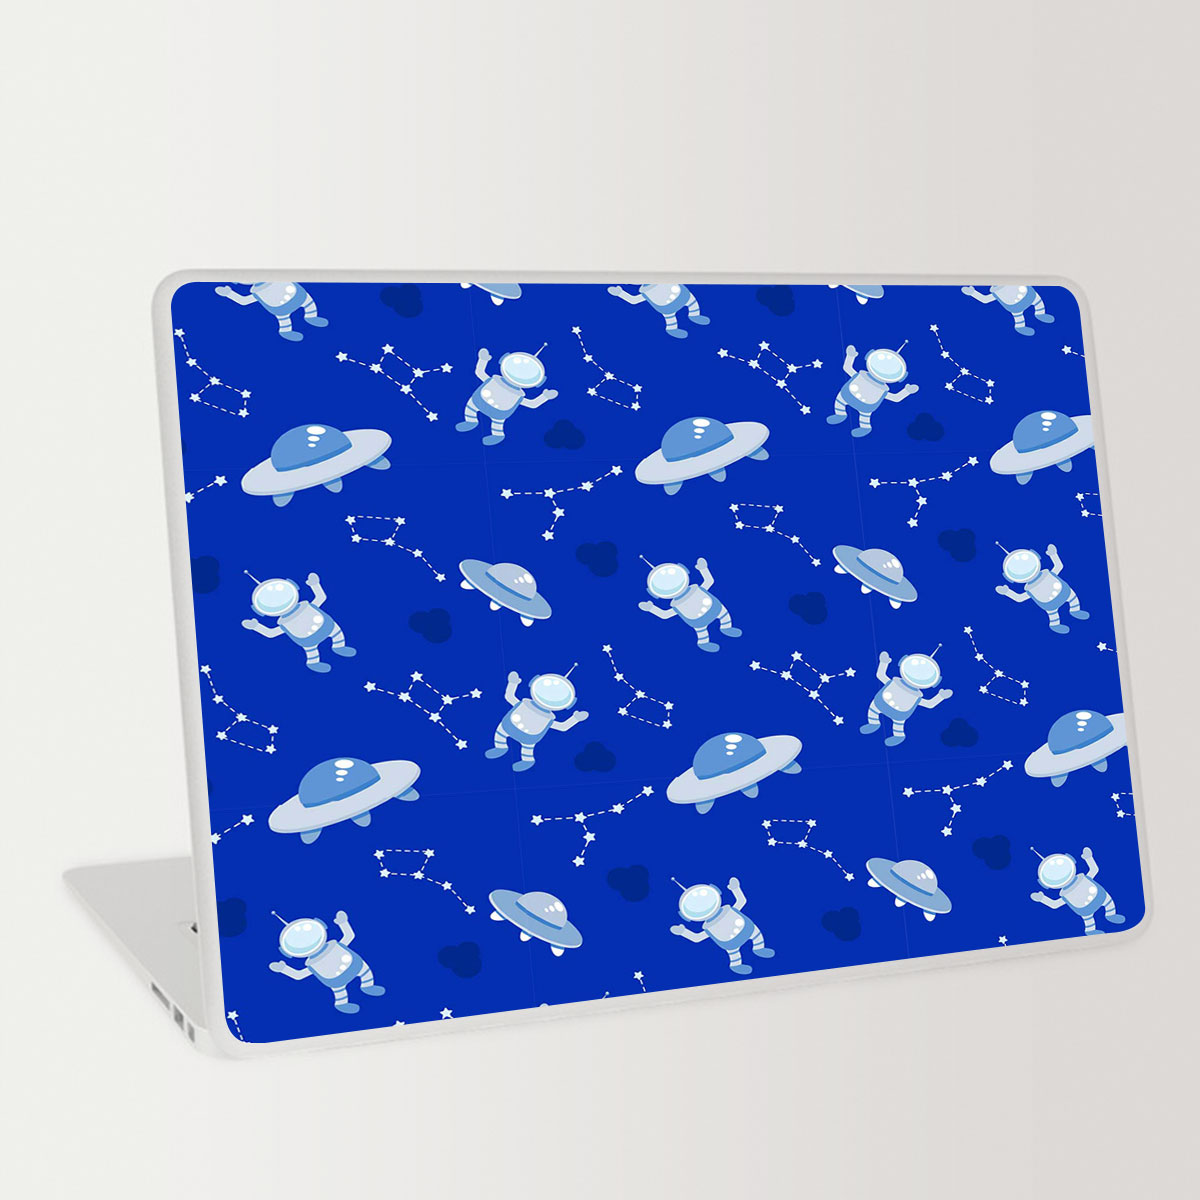 Astronauts Spaceships And Constellation Laptop Skin